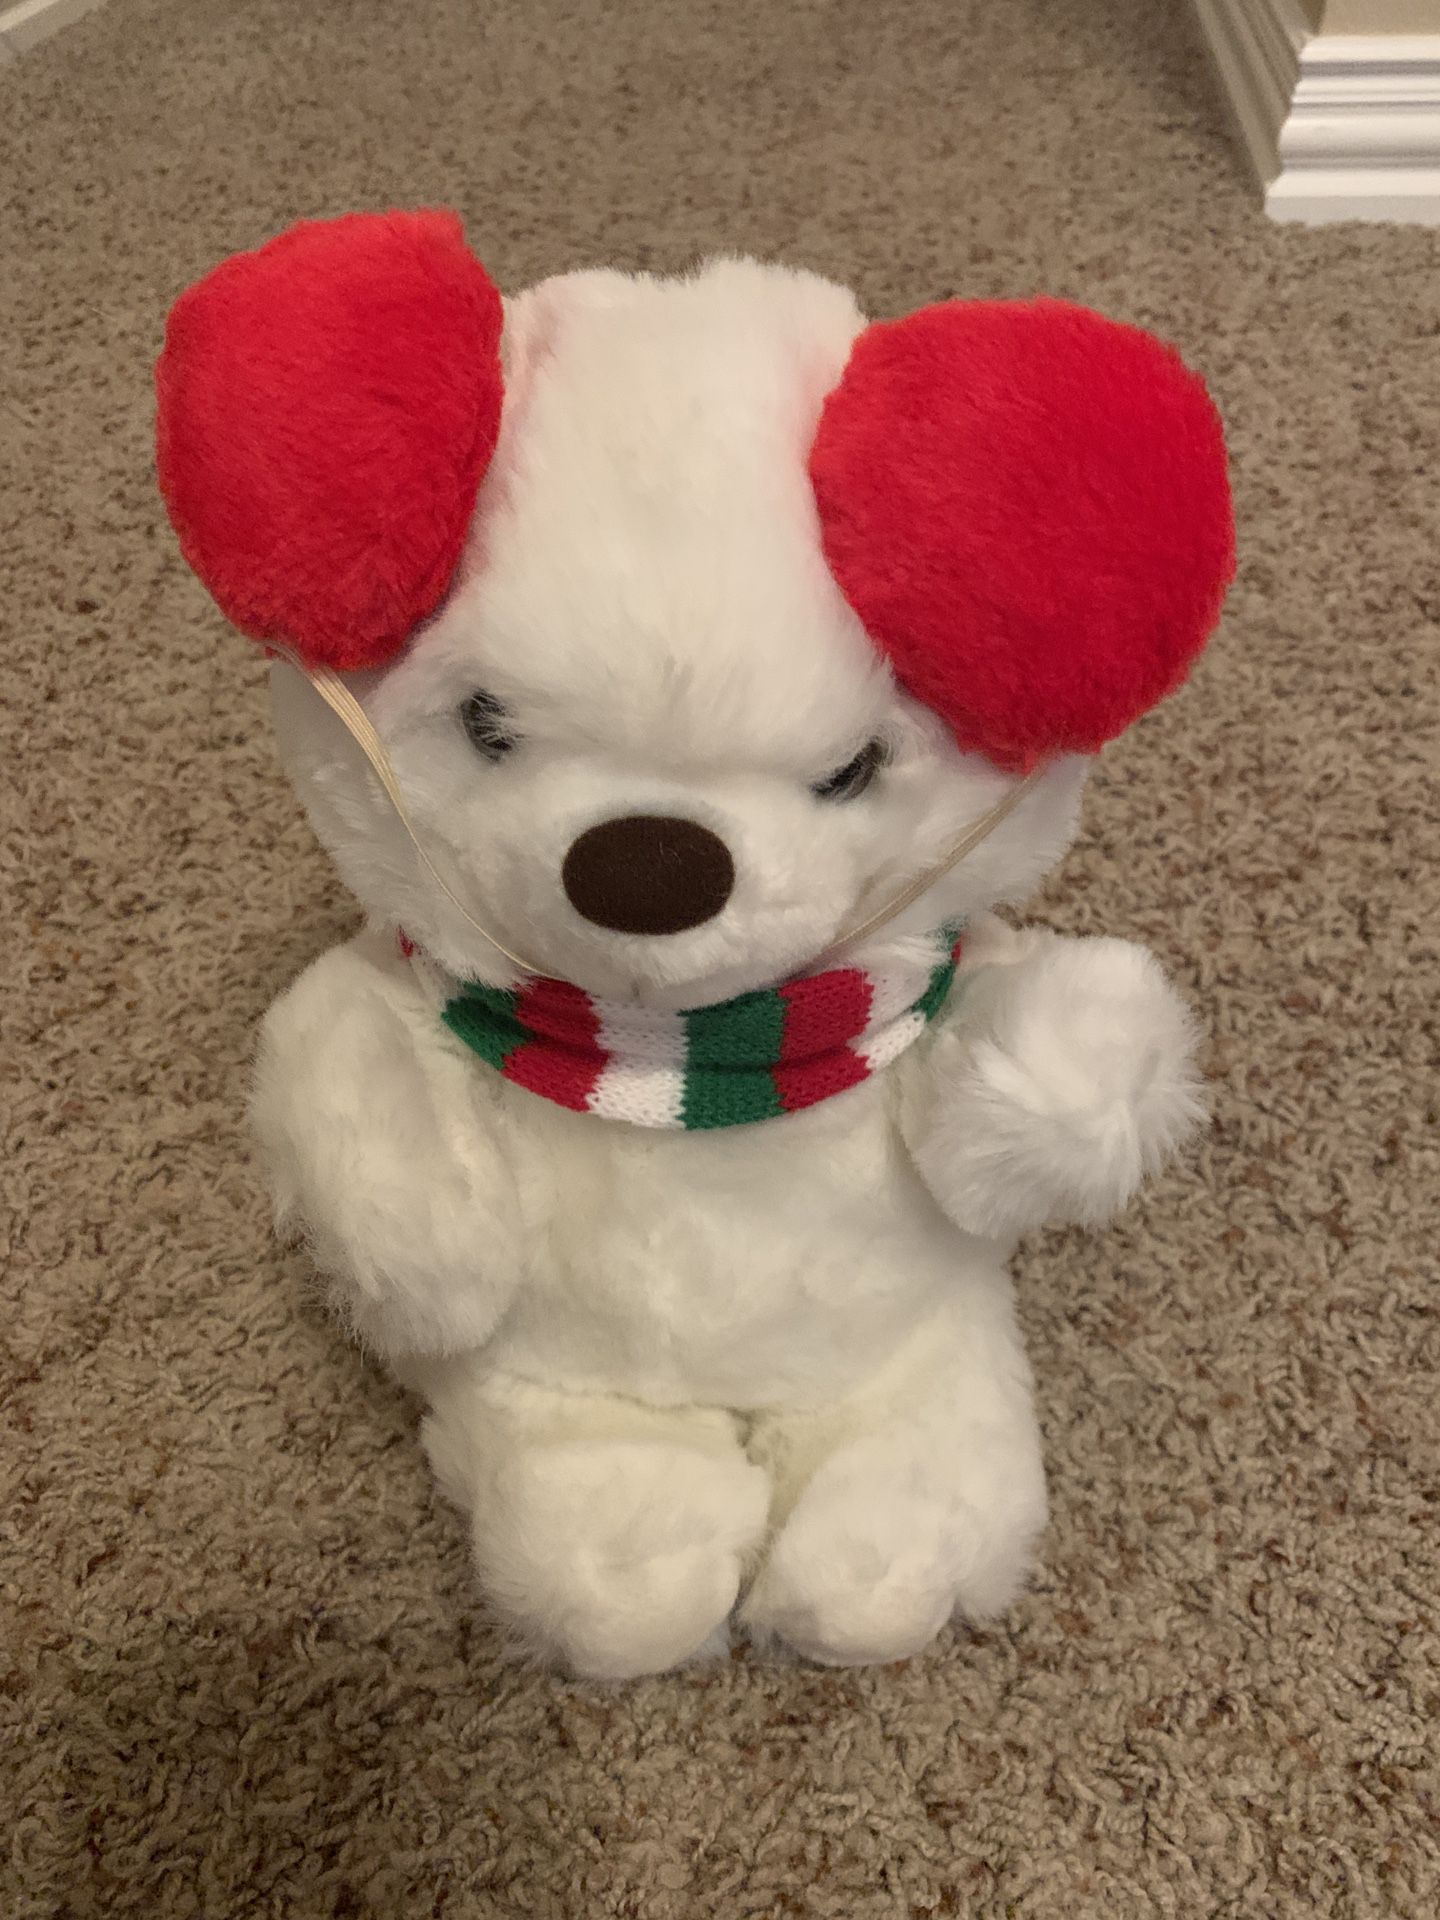 Just Friends Teddy Bear Plush with Red Earmuffs and Scarf